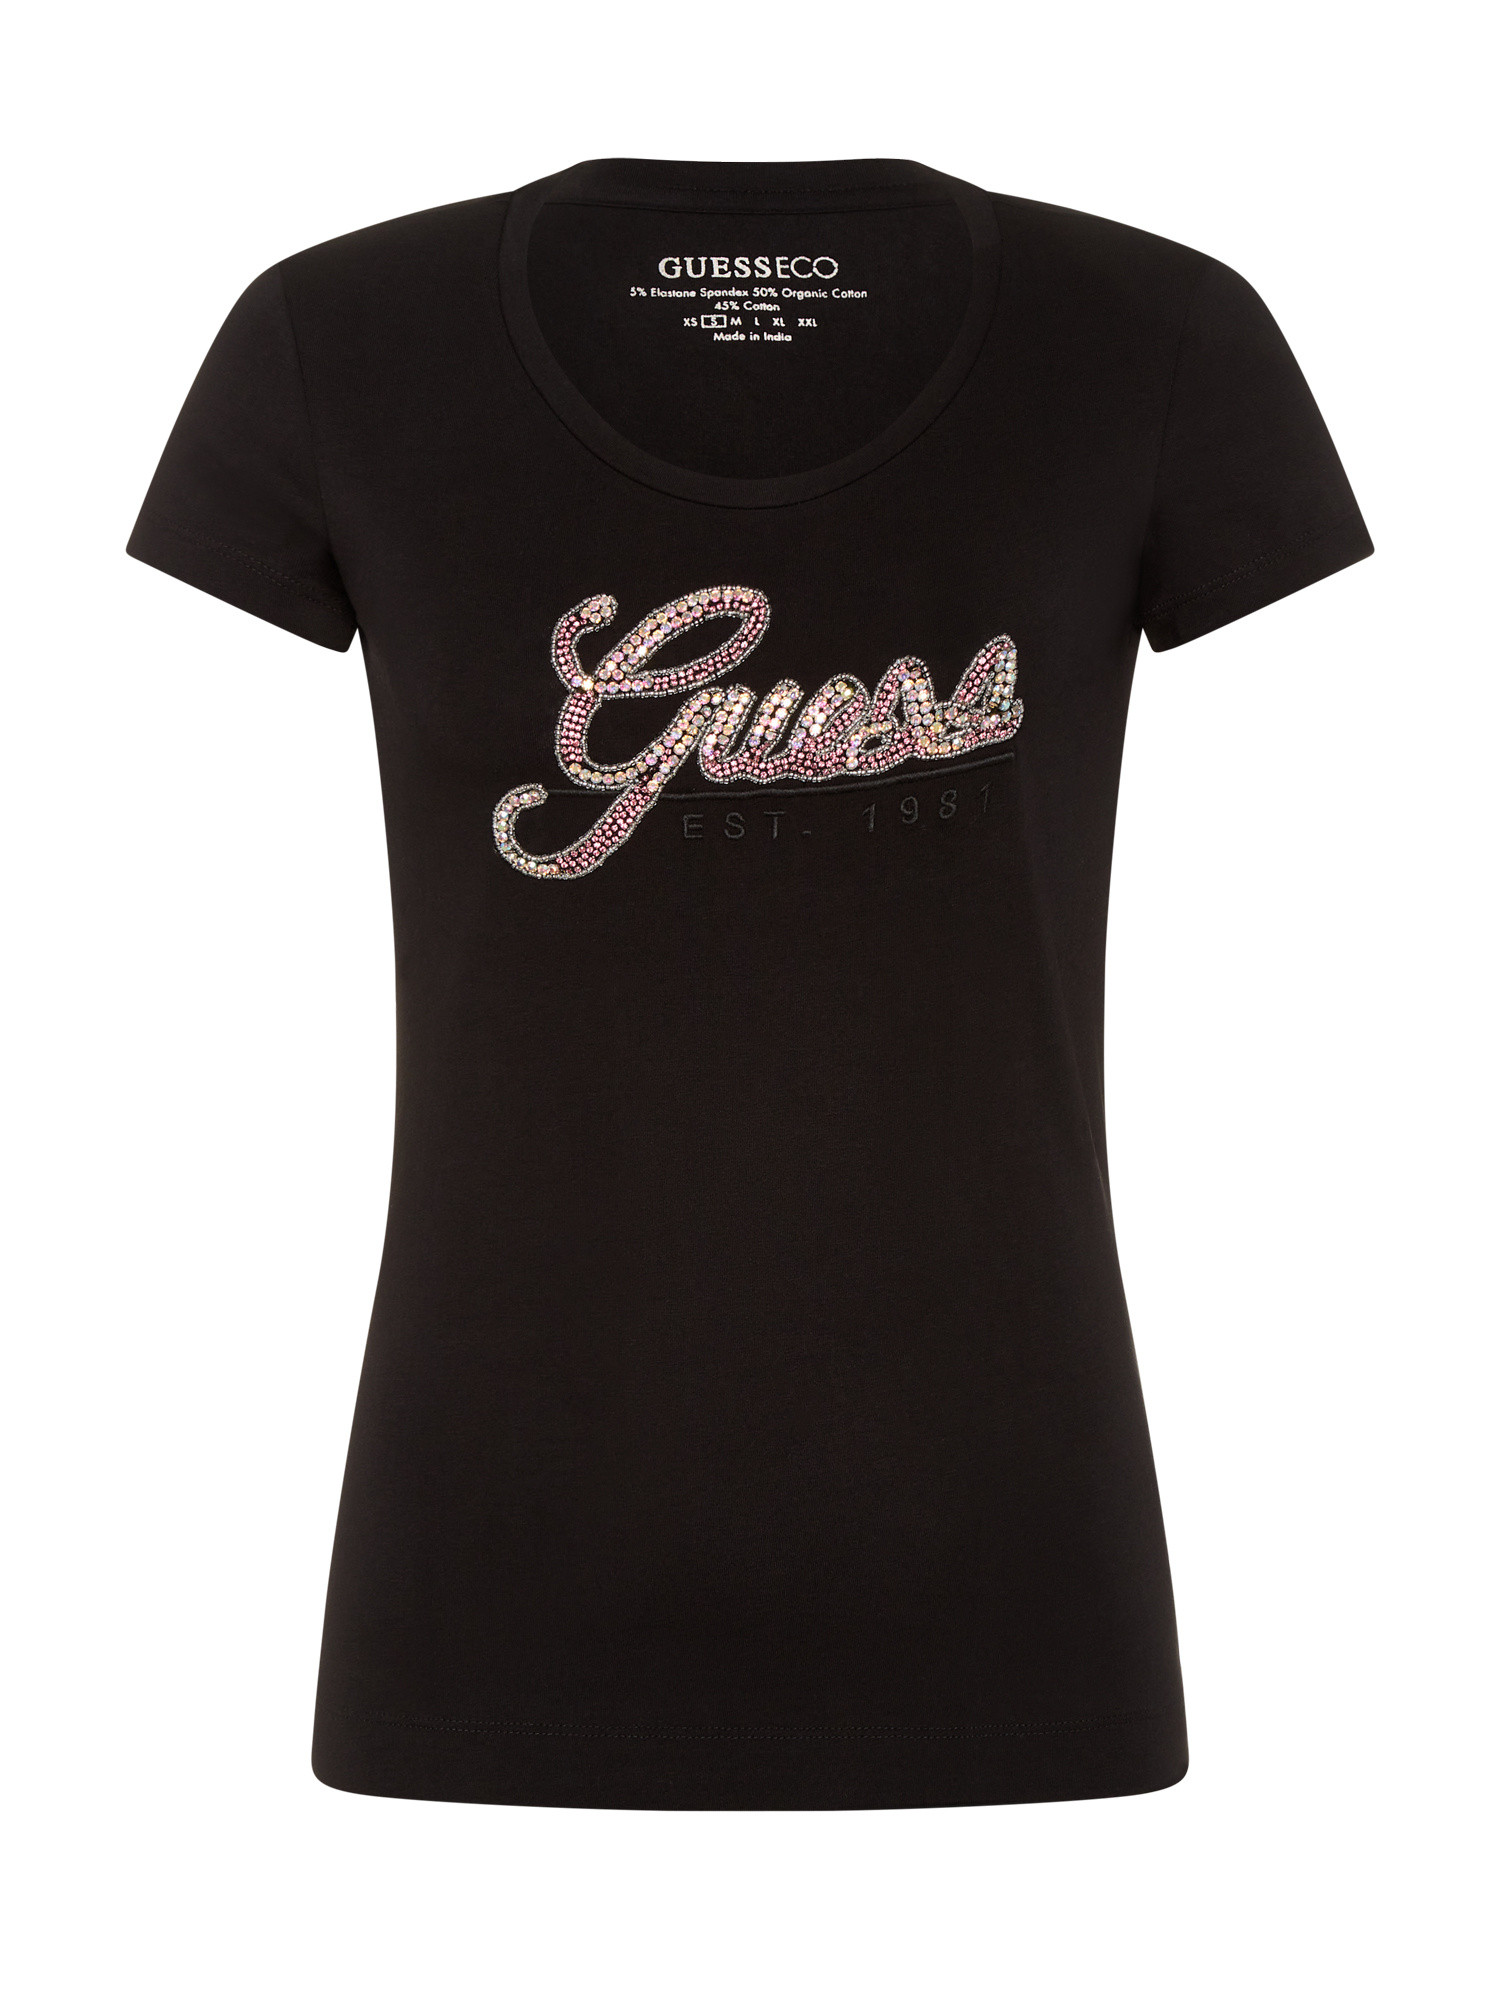 Guess - T-shirt con logo, Nero, large image number 0